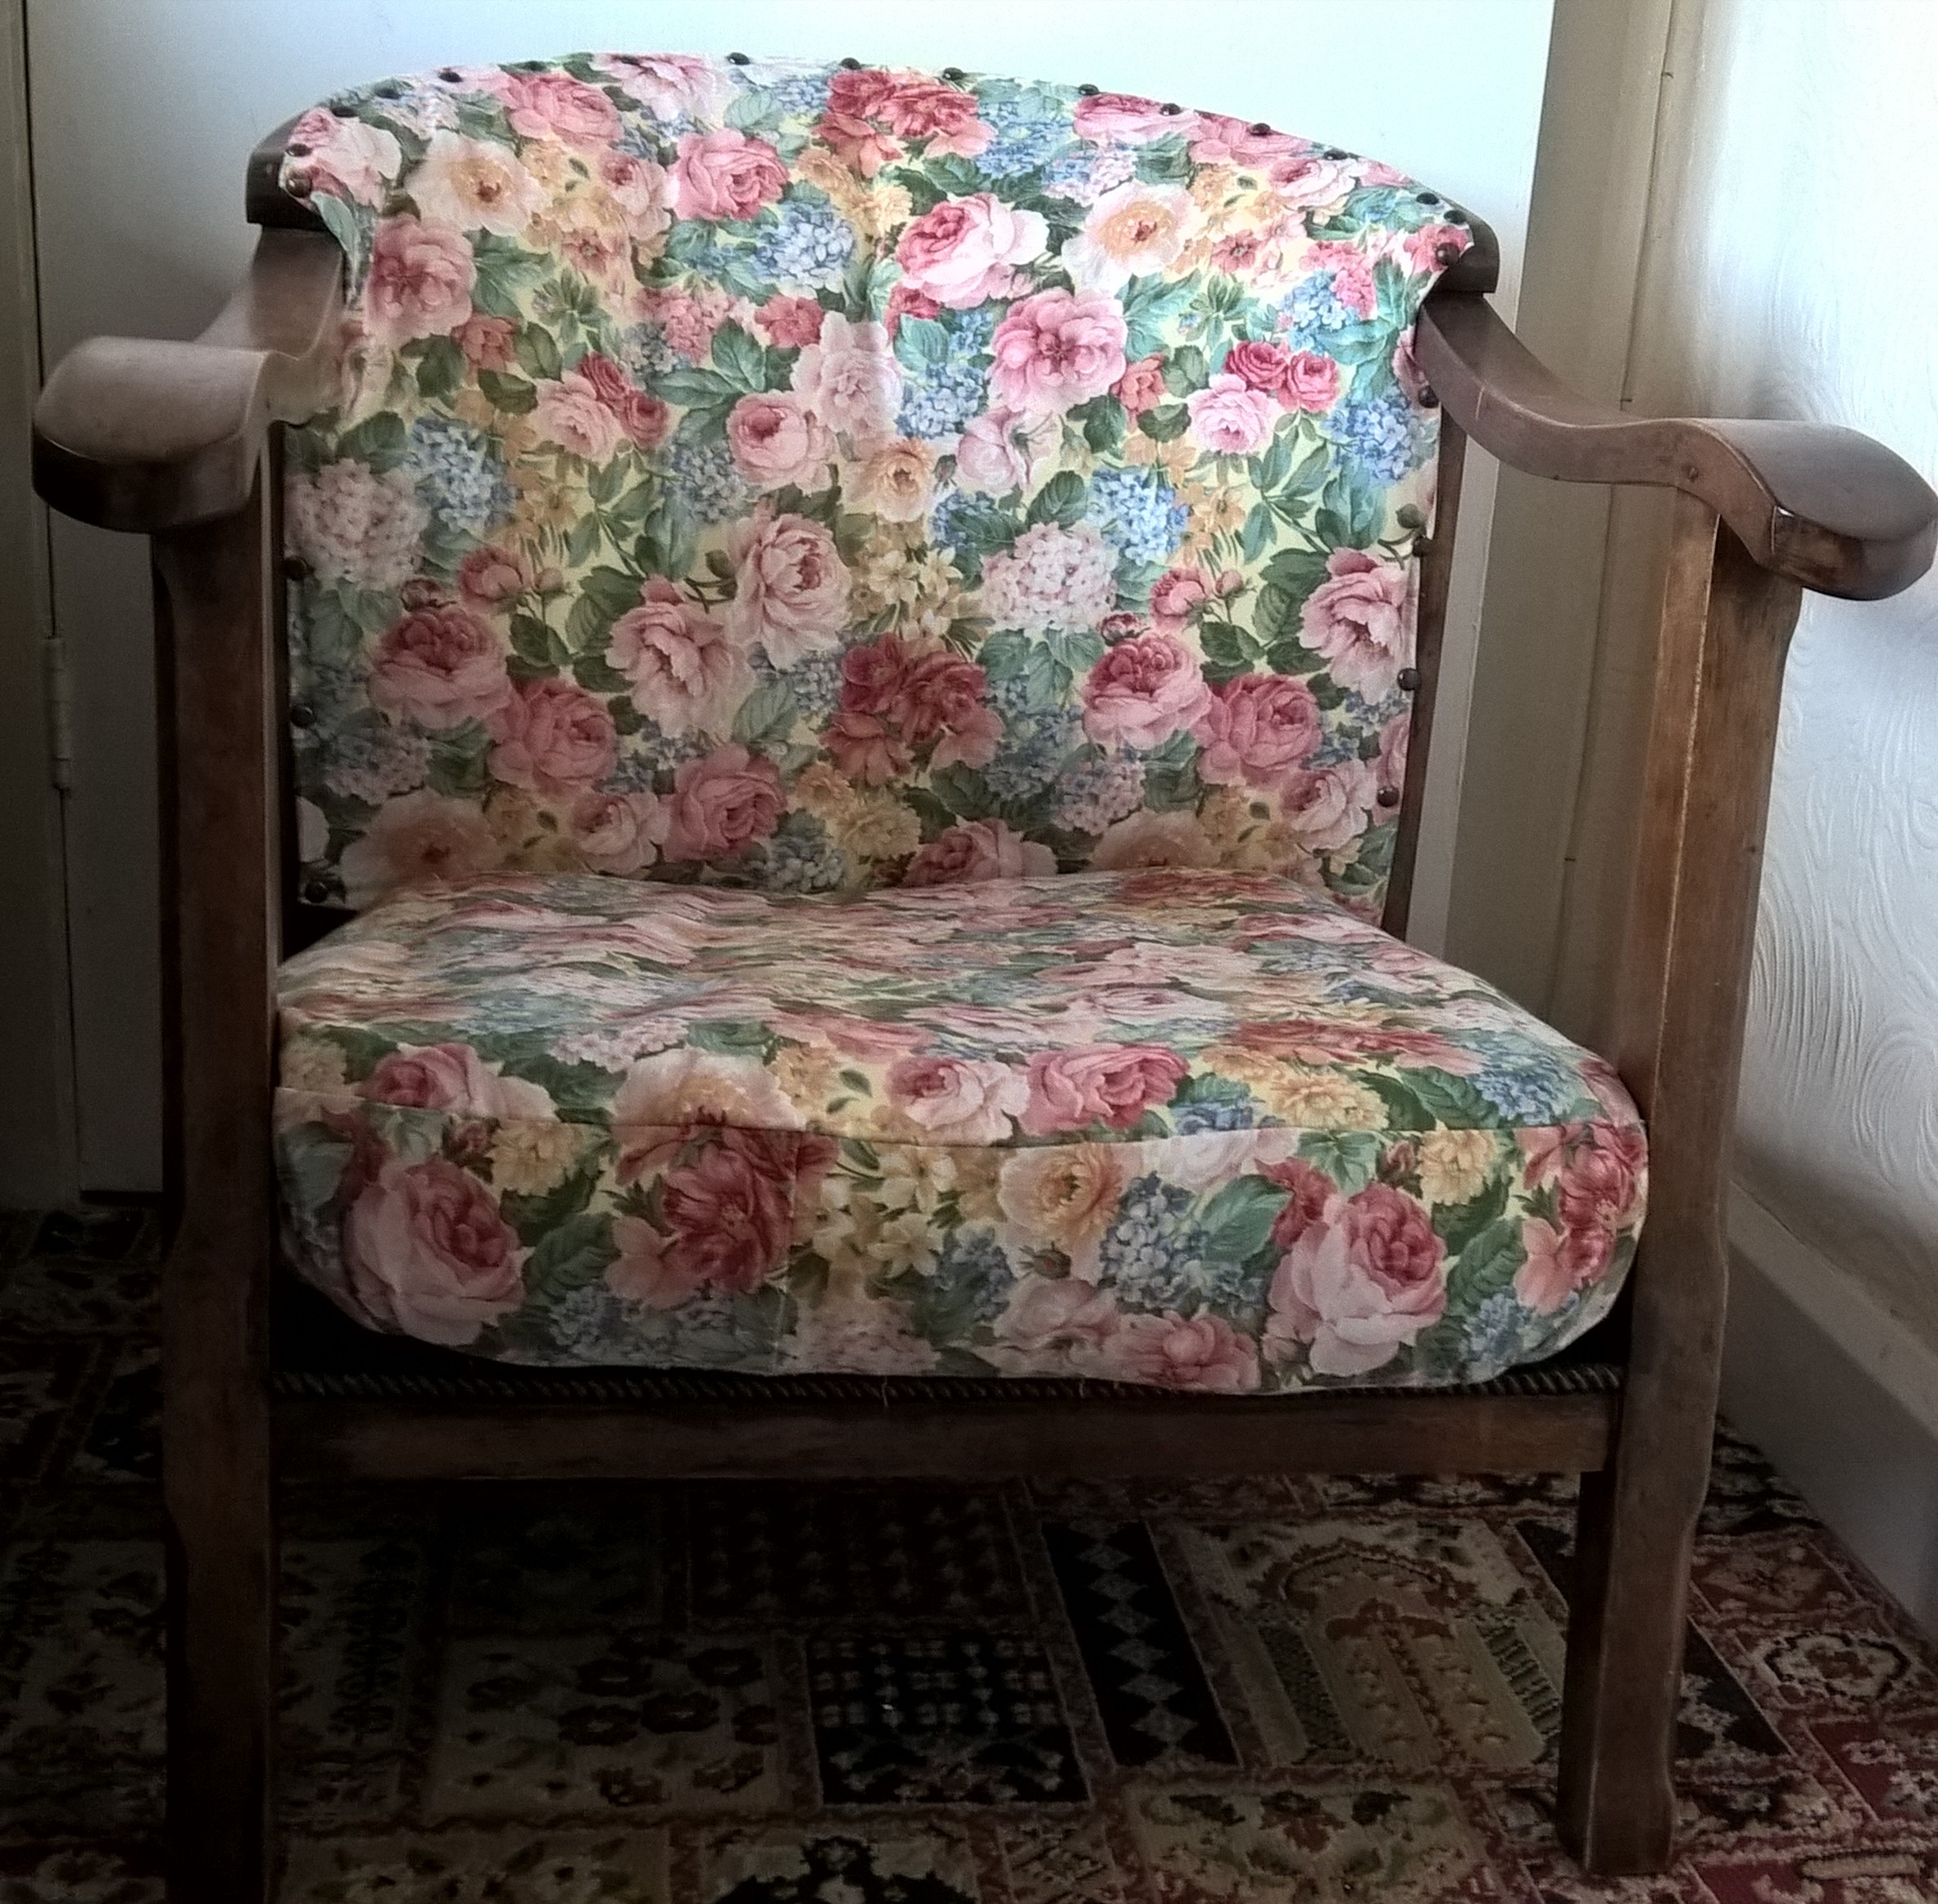 A re-covered Nursing chair